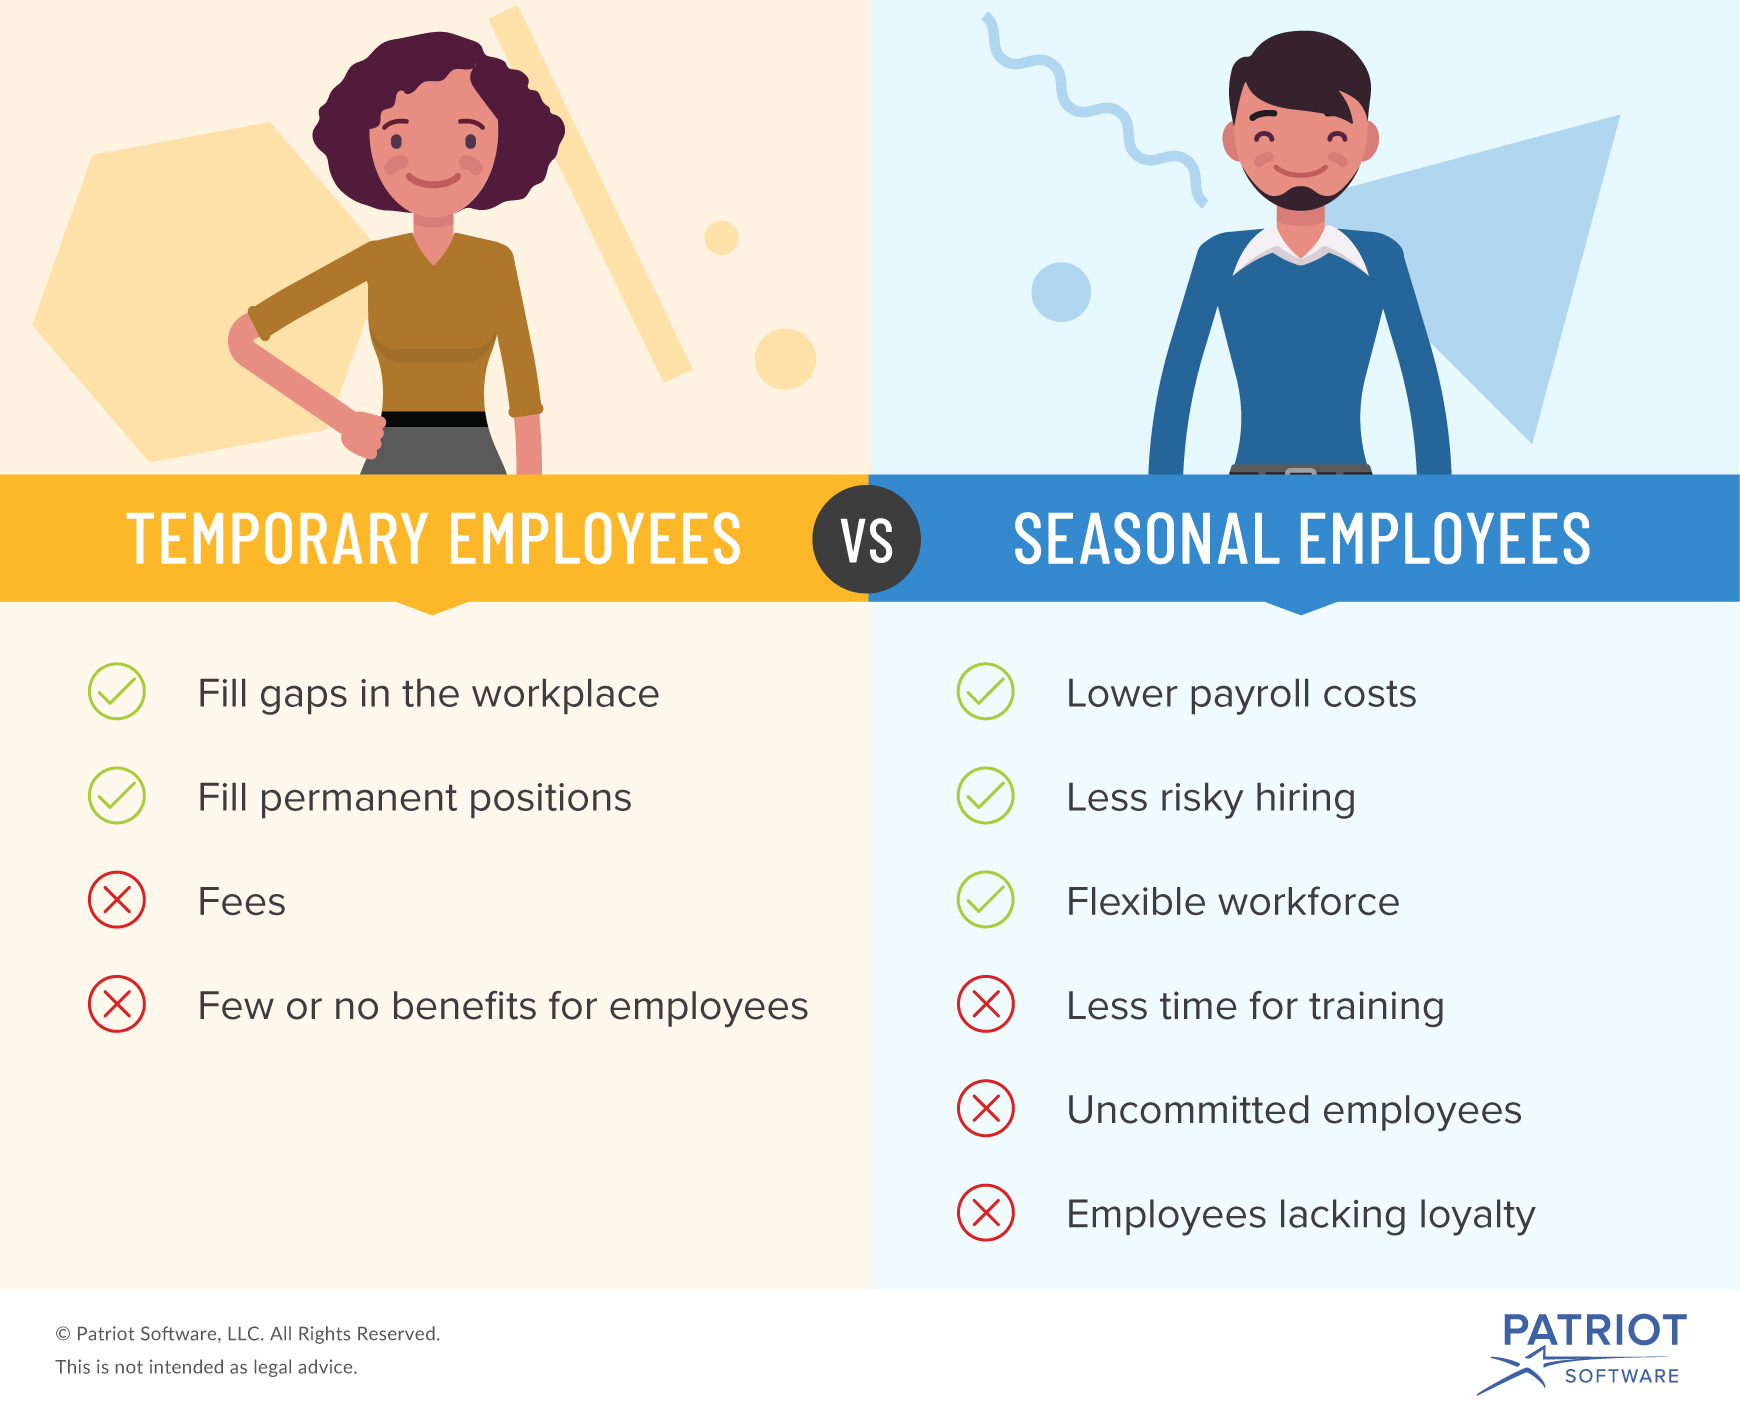 Why Do Companies Hire Temporary Employees?